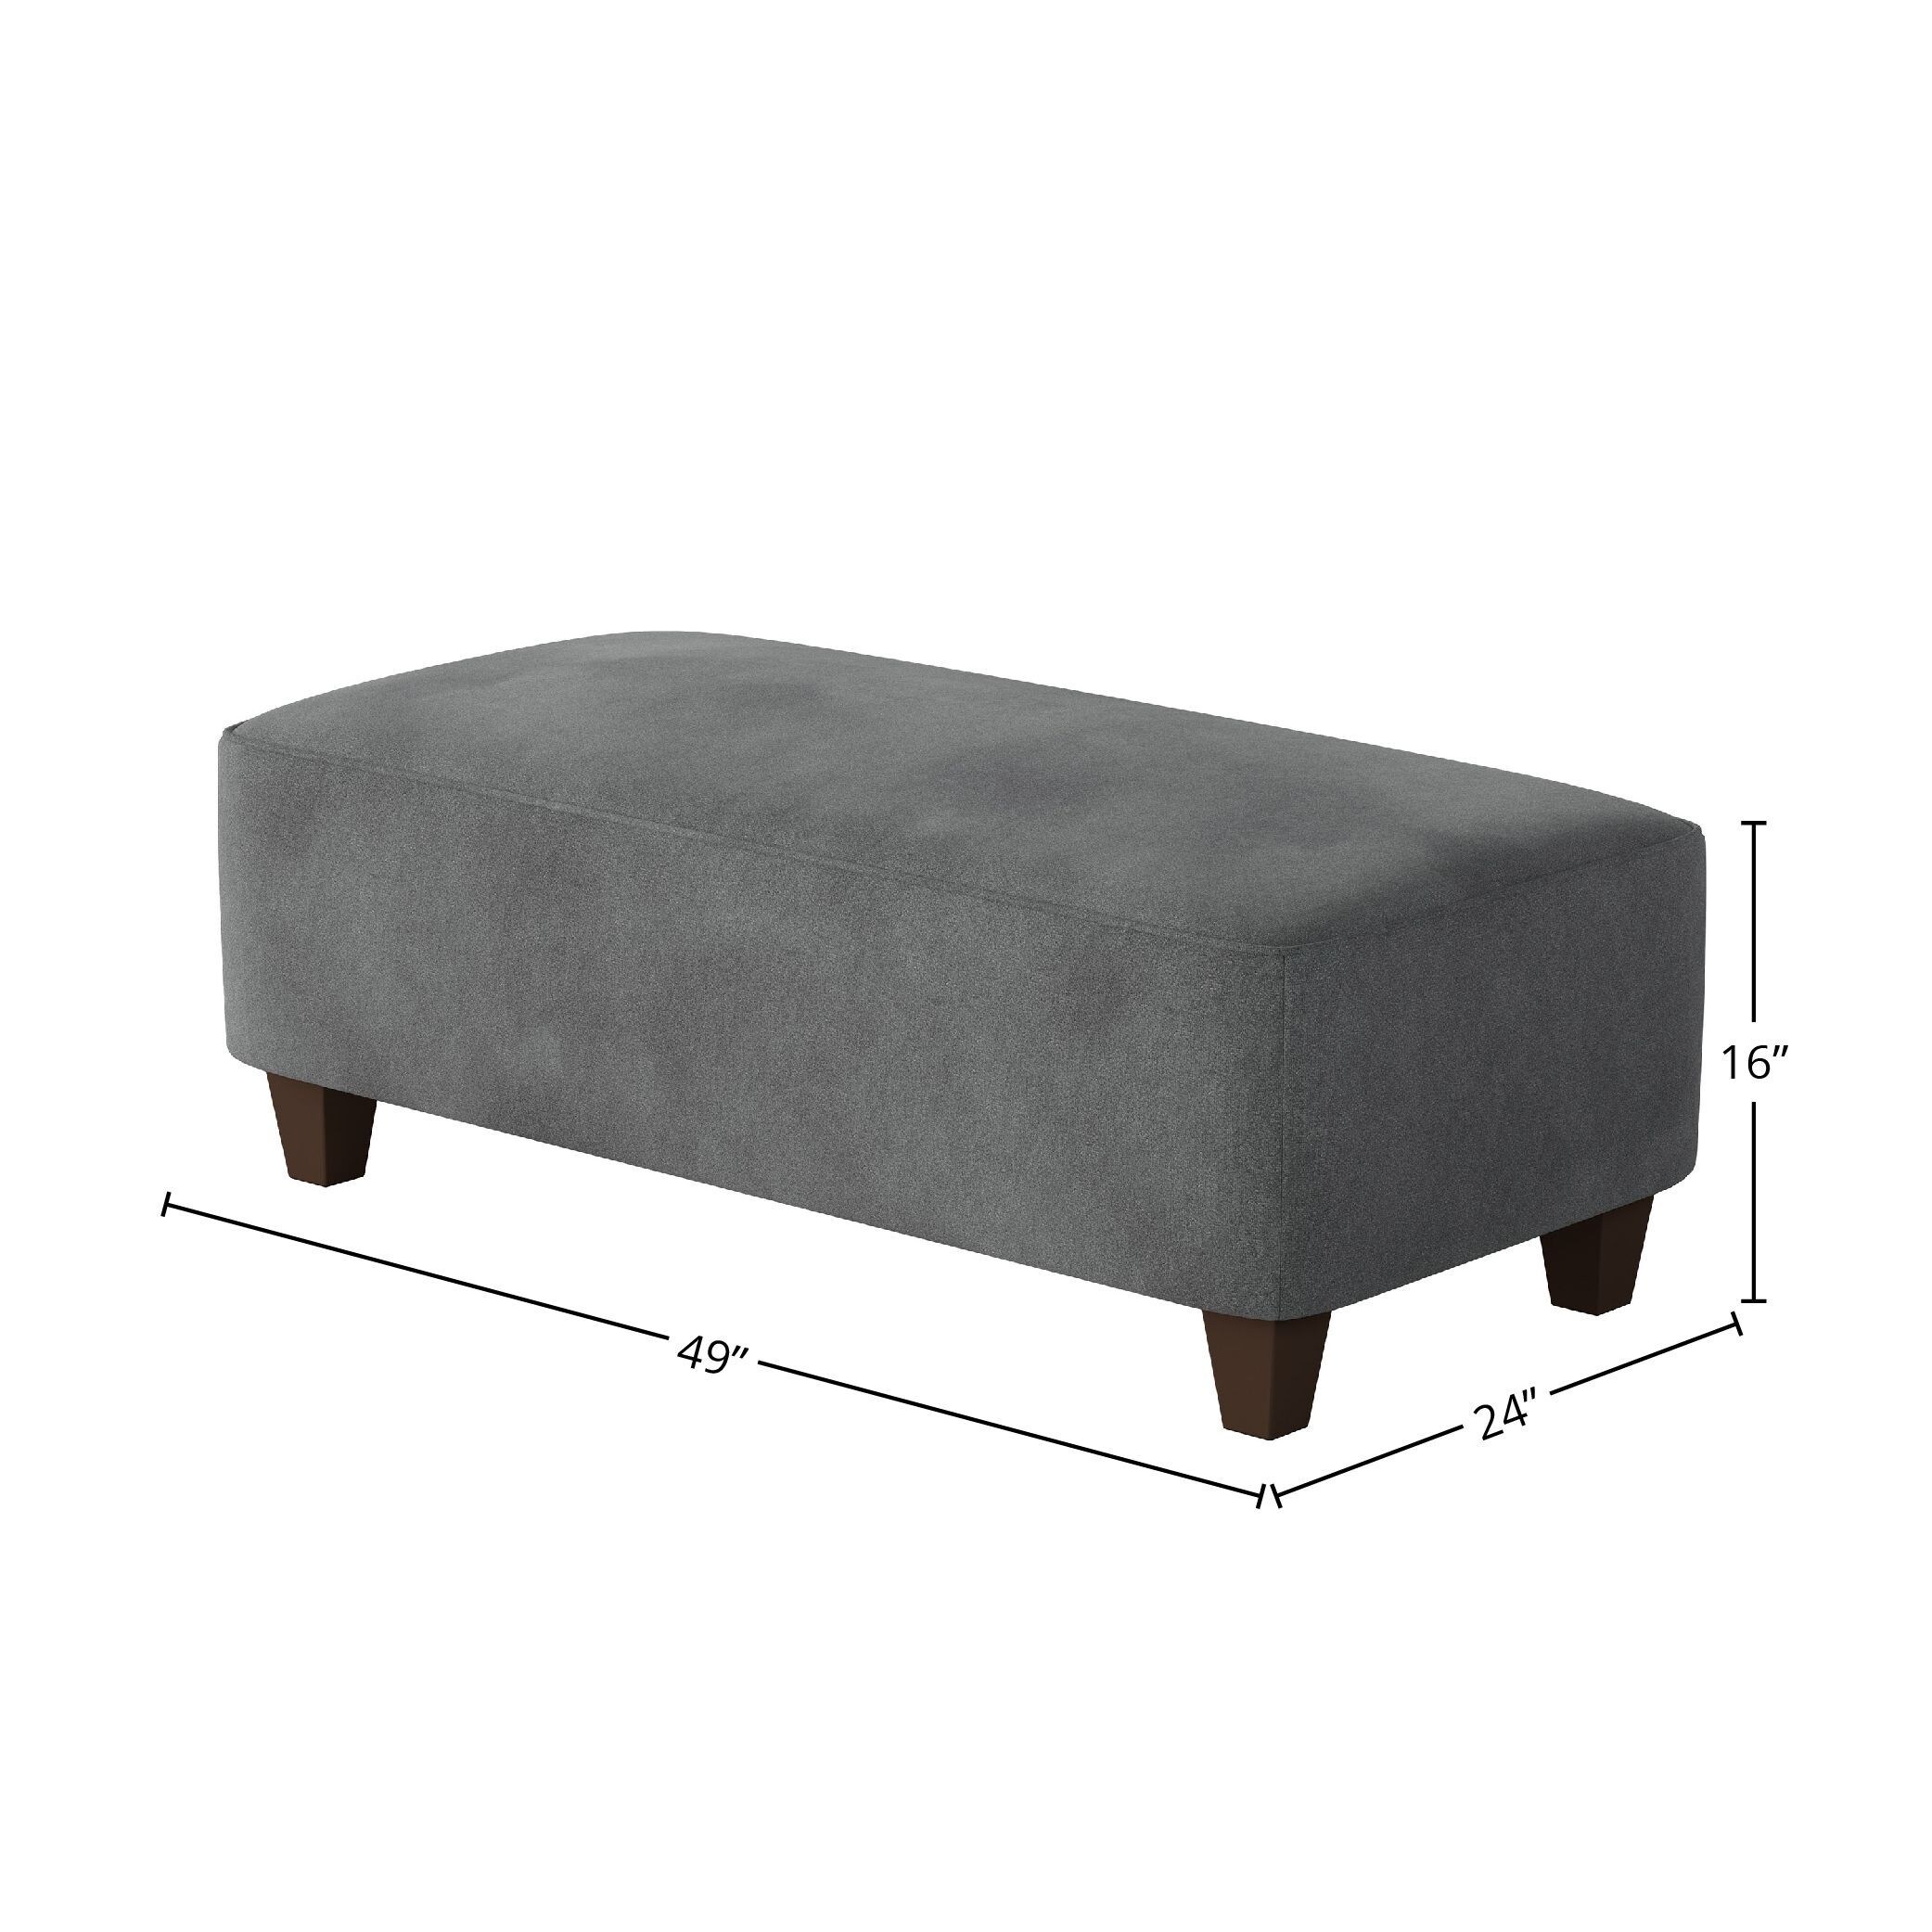 Ceila Upholstered Accent Ottoman, Gray